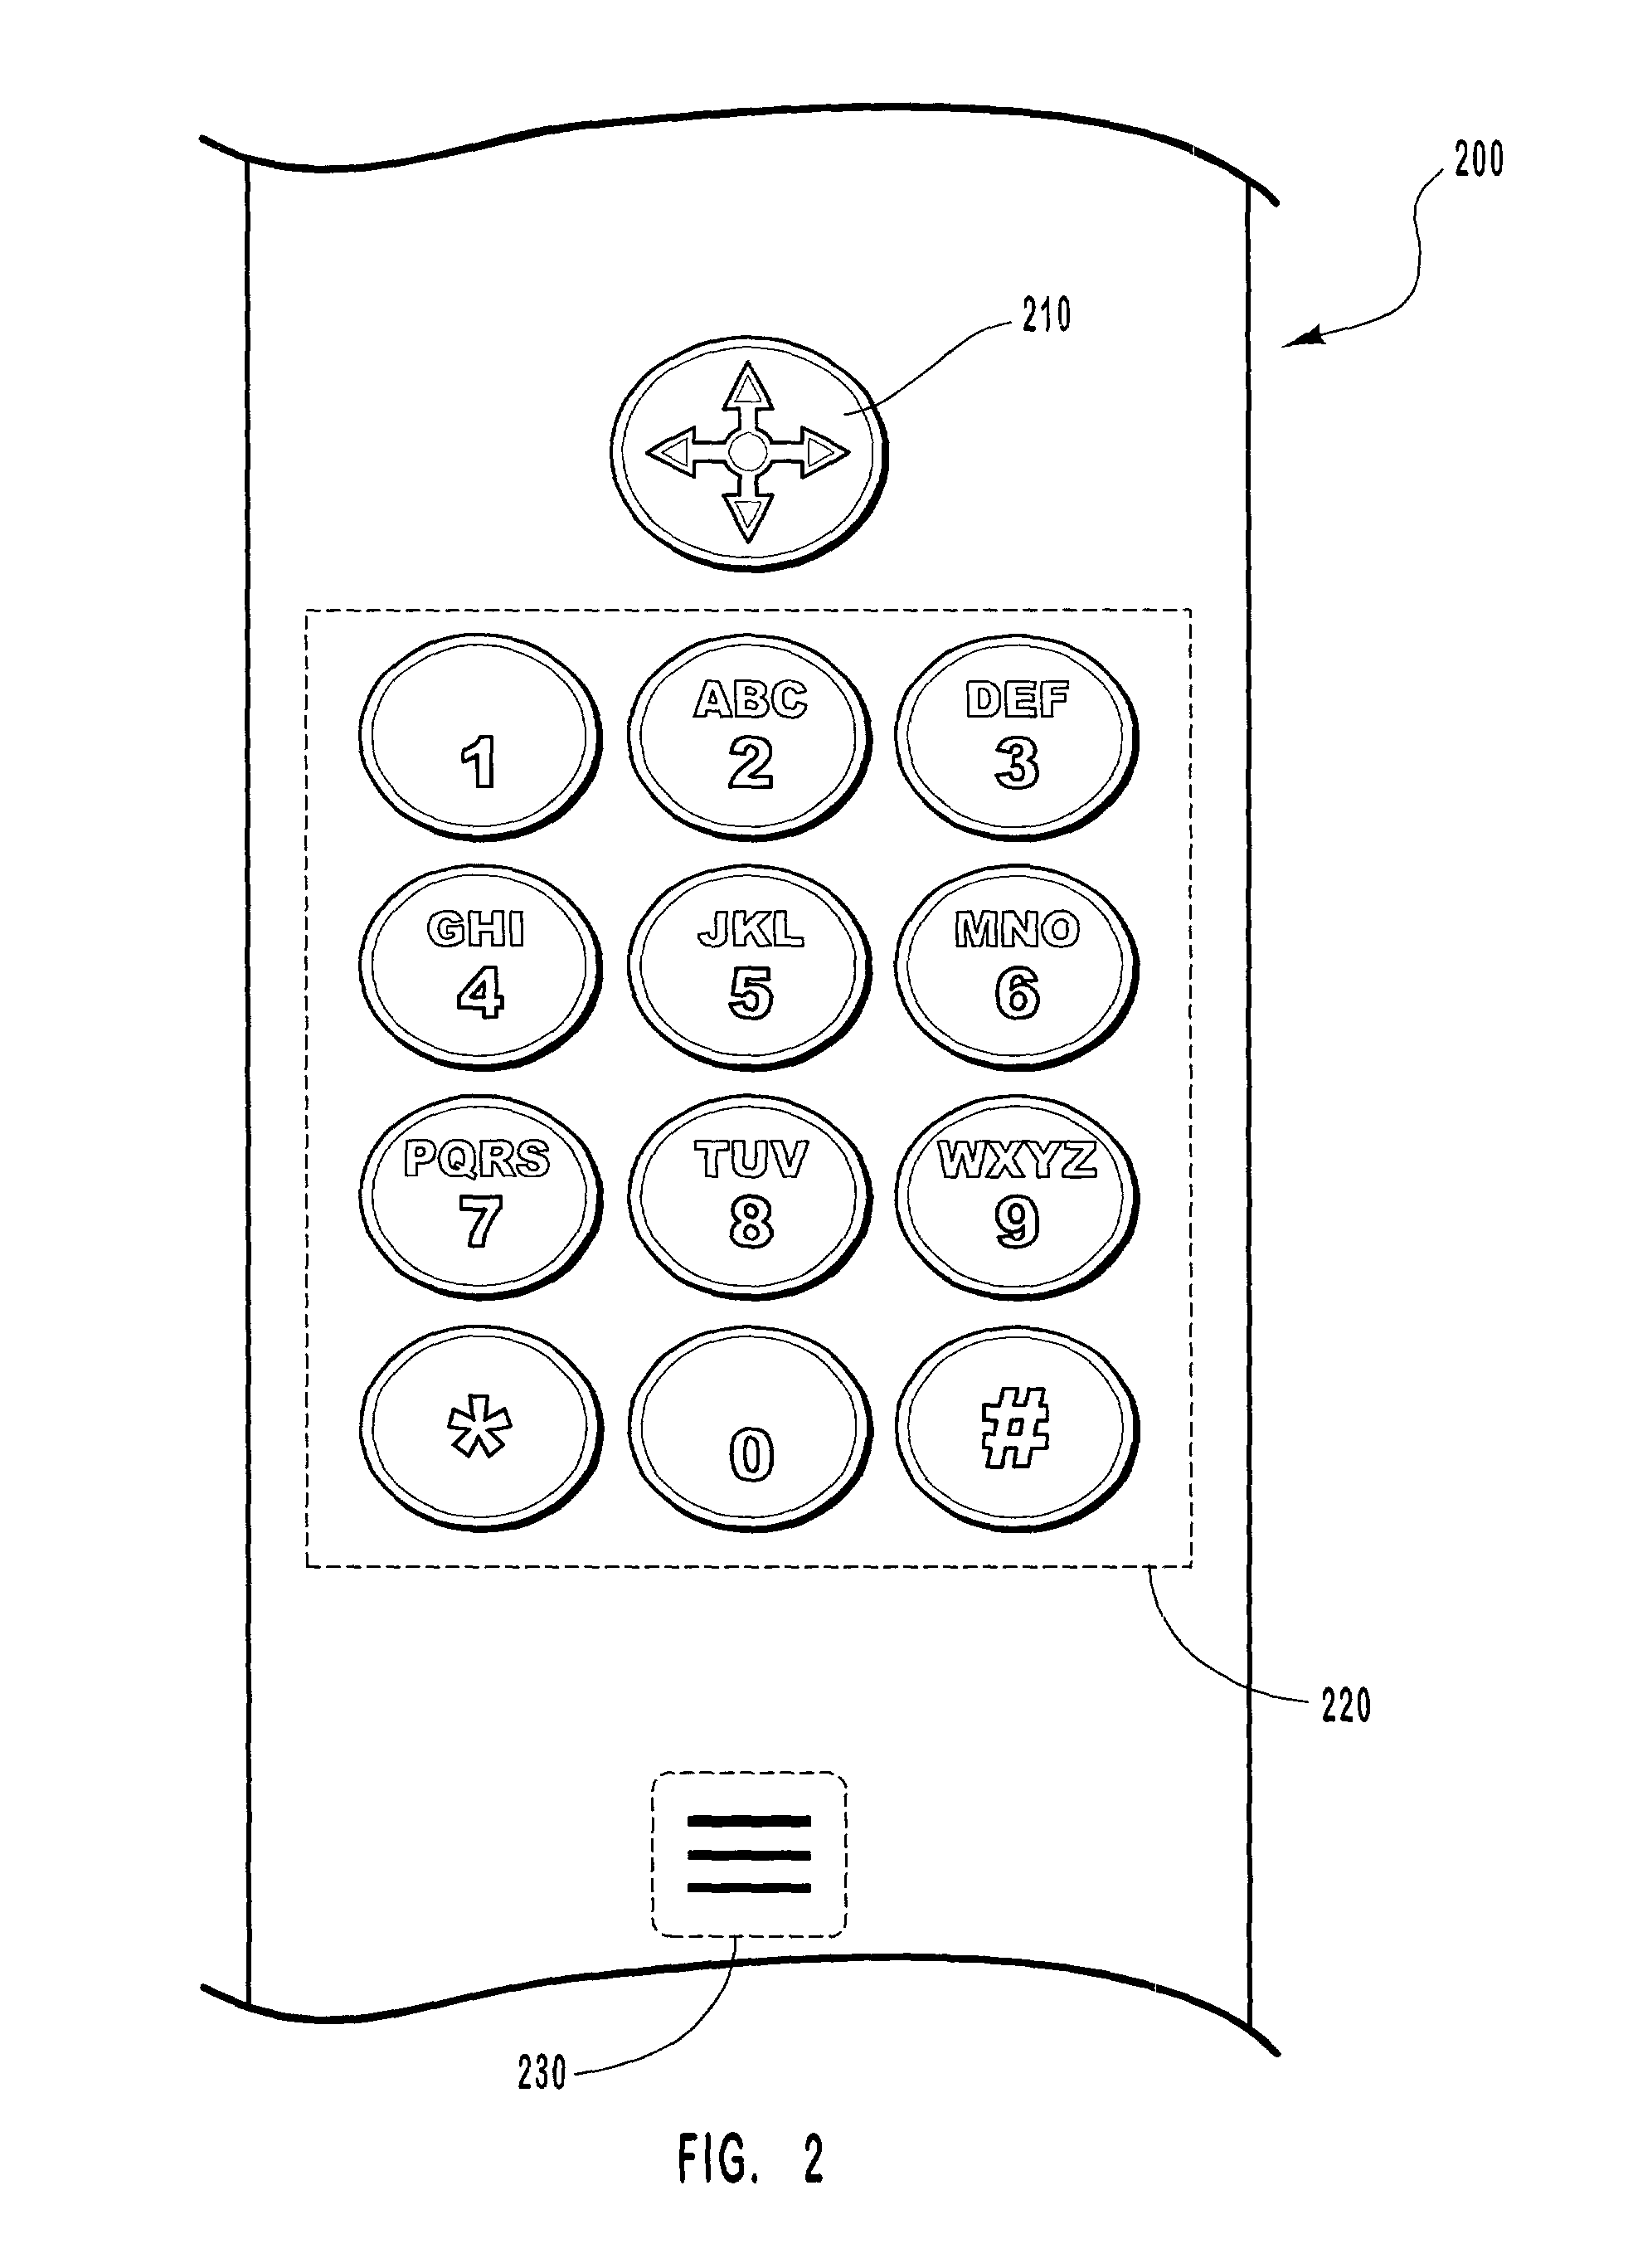 Using a mobile device to compose an electronic message that includes audio content